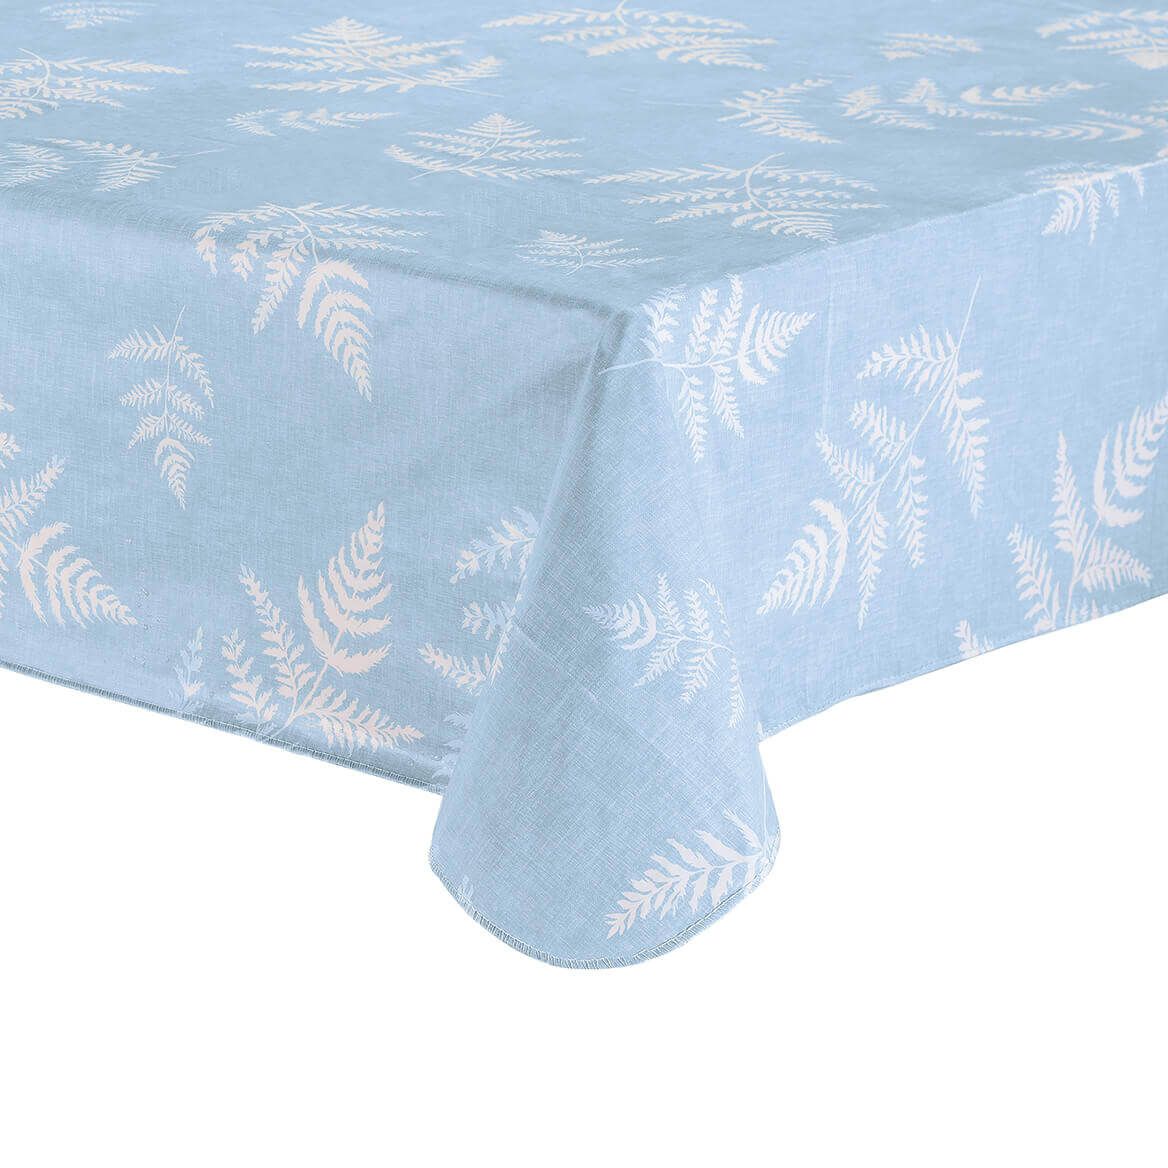 Fern Vinyl Table Cover by Home-Style Kitchen + '-' + 366988